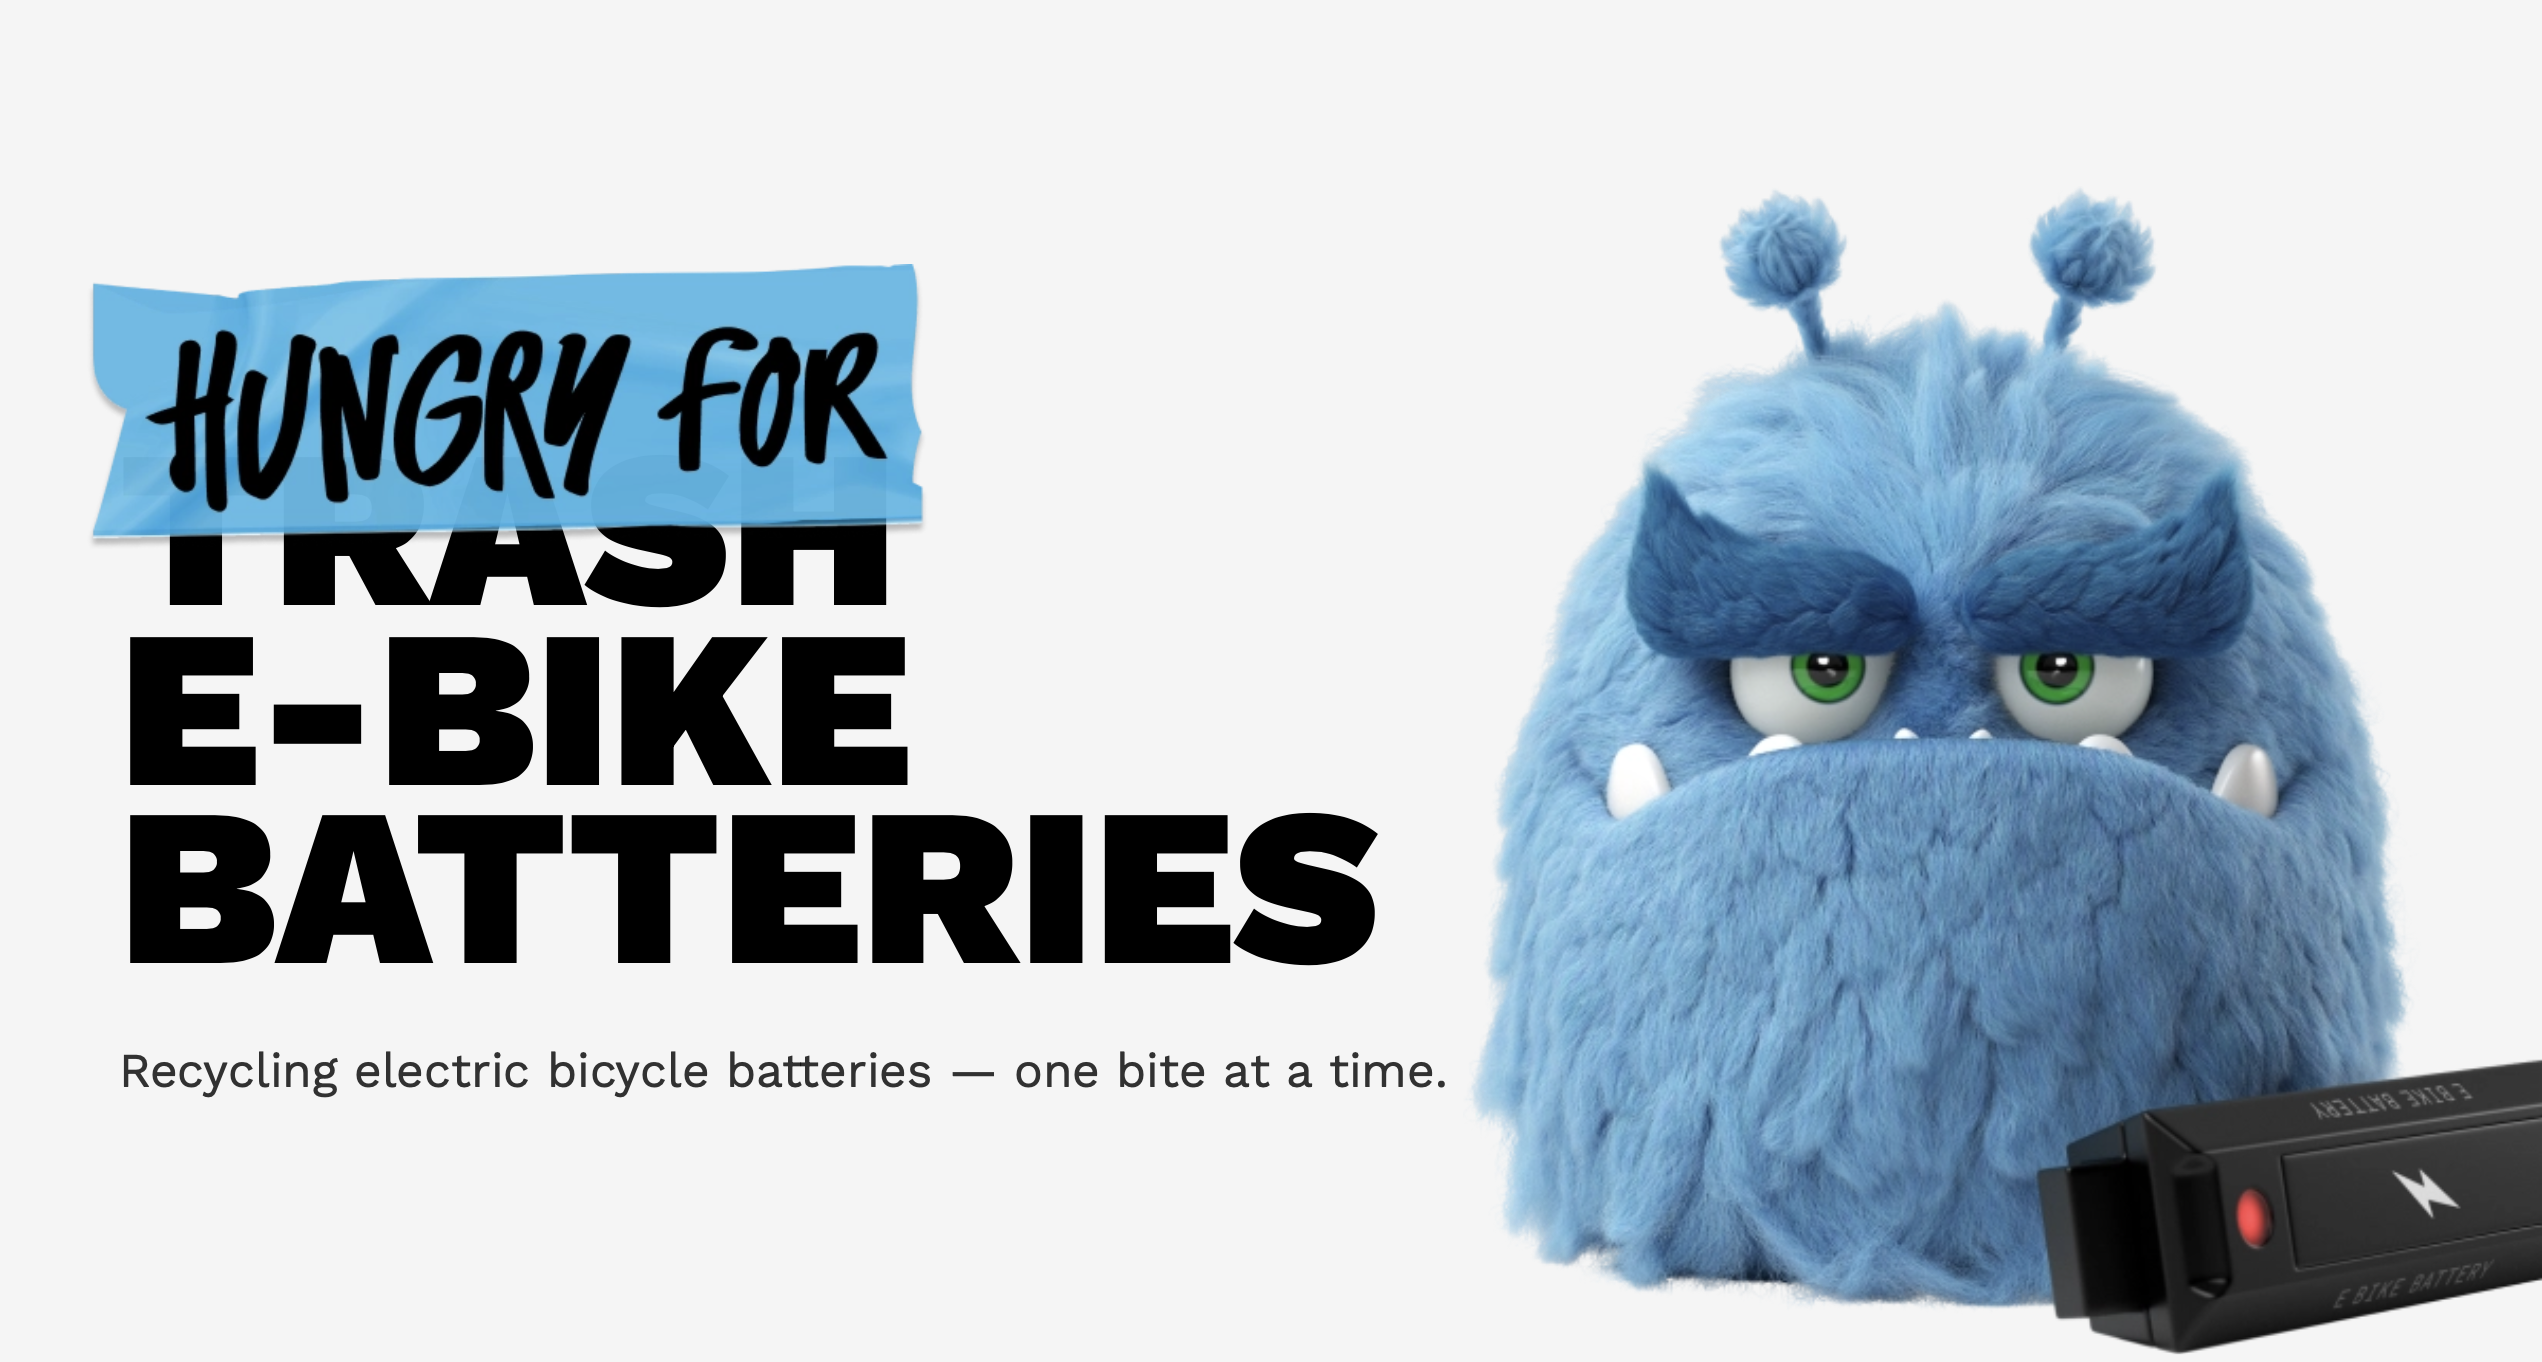 WATTS is Hungry for E-Bike Batteries